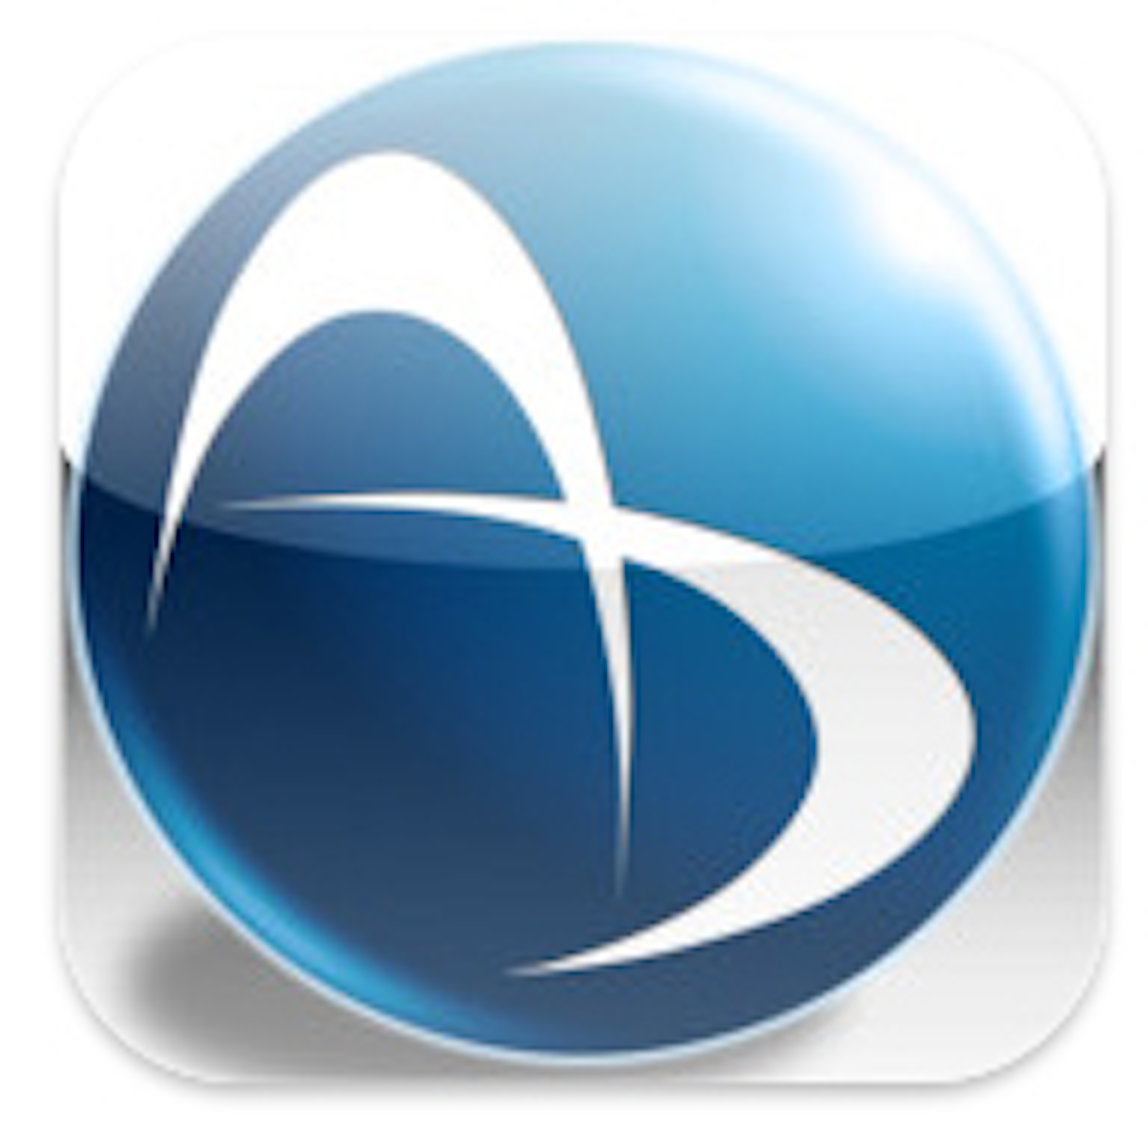 American Dynamics' ADTVR Viewer app | Security Info Watch